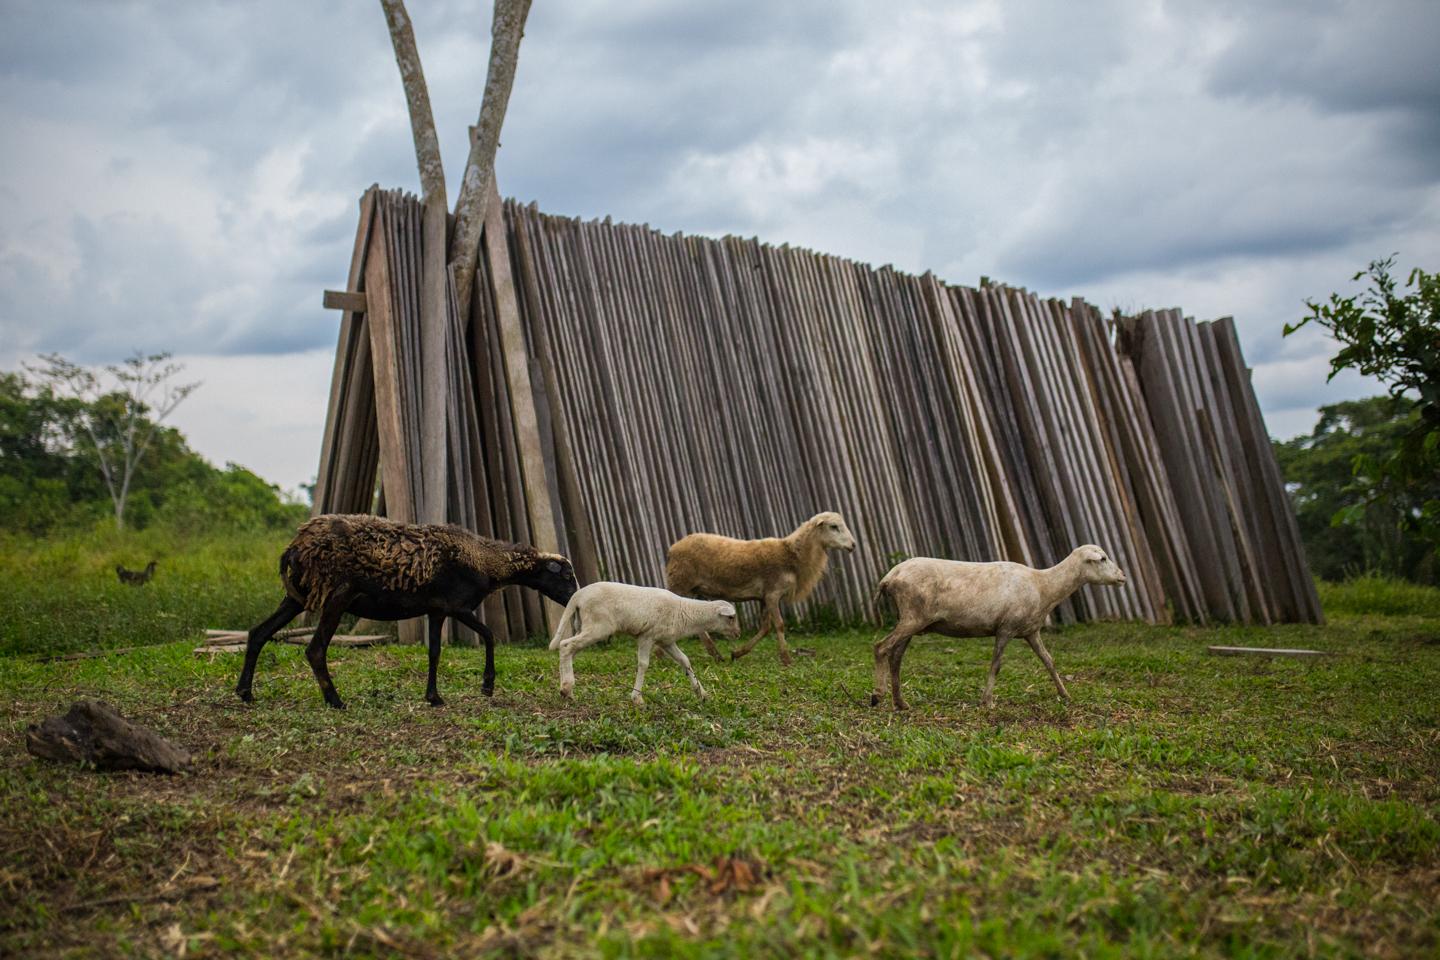 Cattle ranching is a leading cause of deforestation in Colombia.